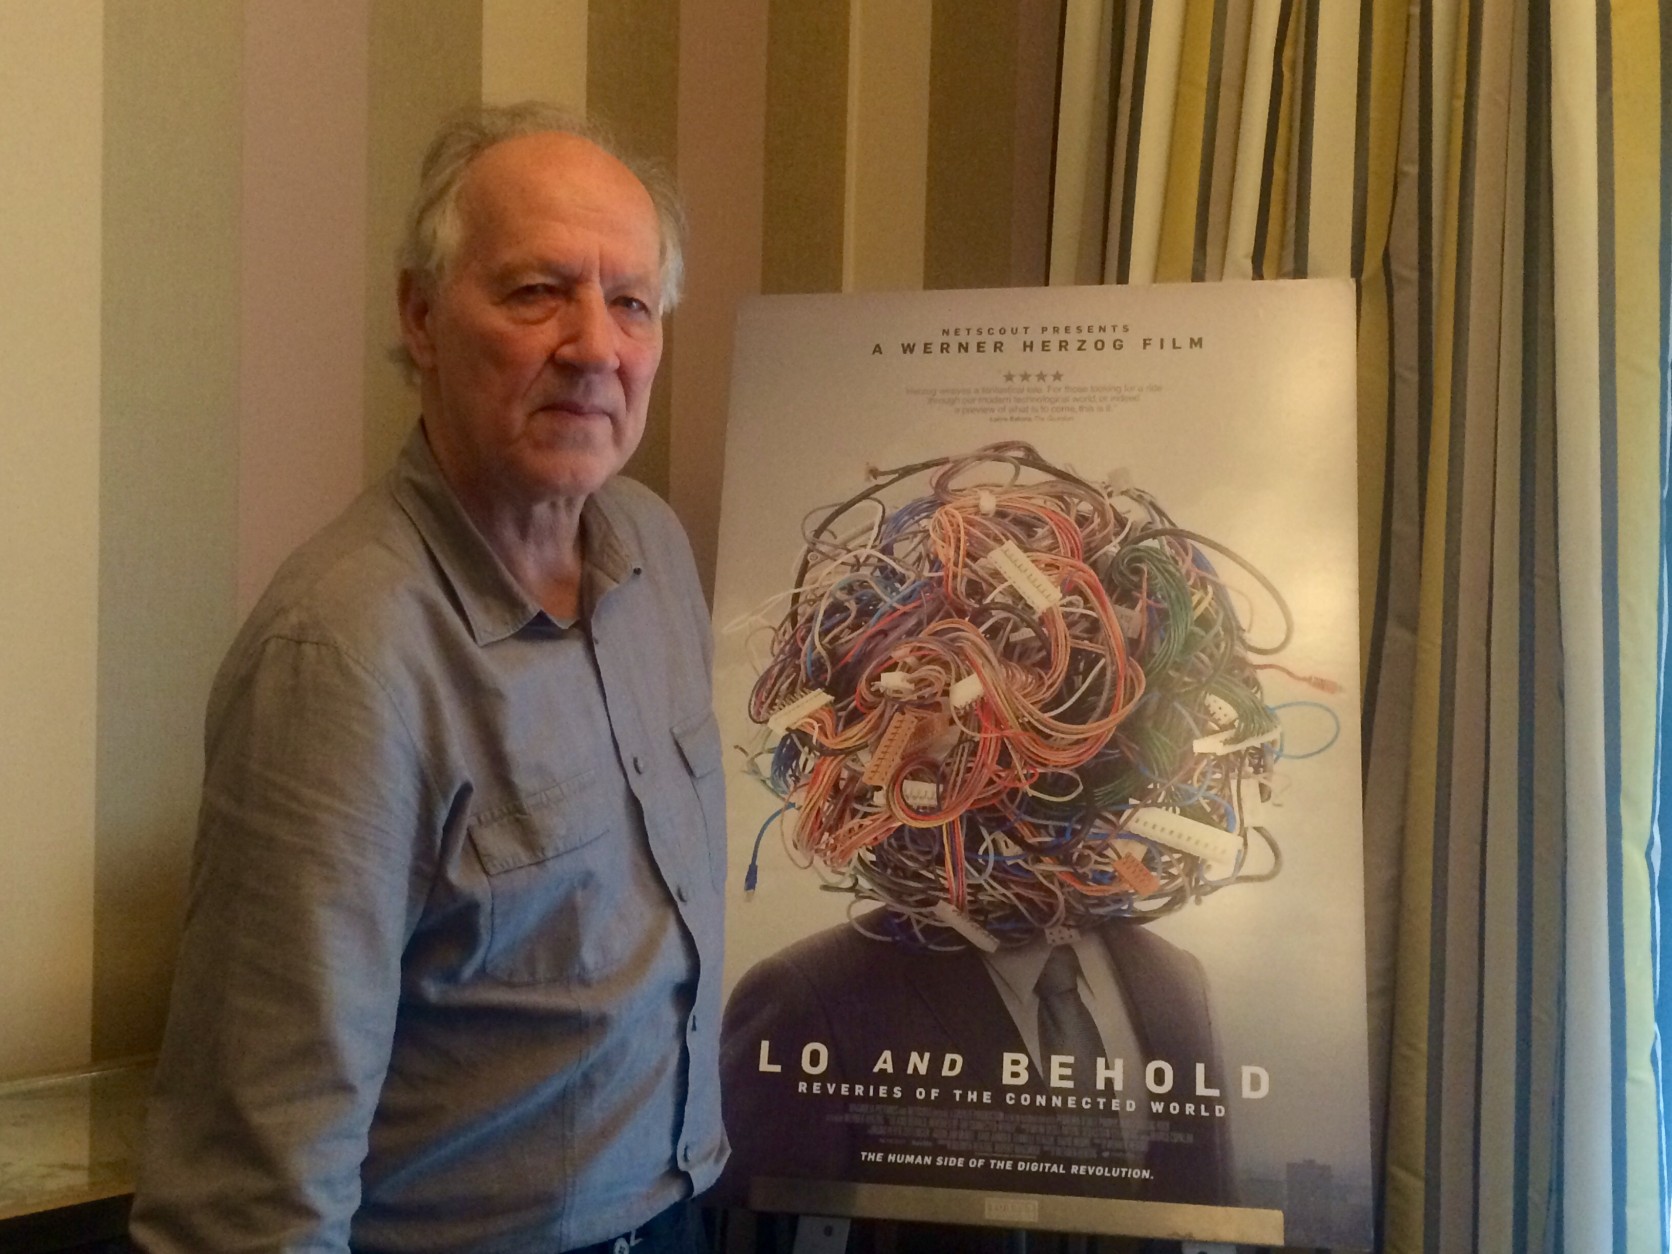 Werner Herzog presents "Lo and Behold" at AFI Docs ahead of his honor at the Guggenheim Symposium. (WTOP/Jason Fraley)